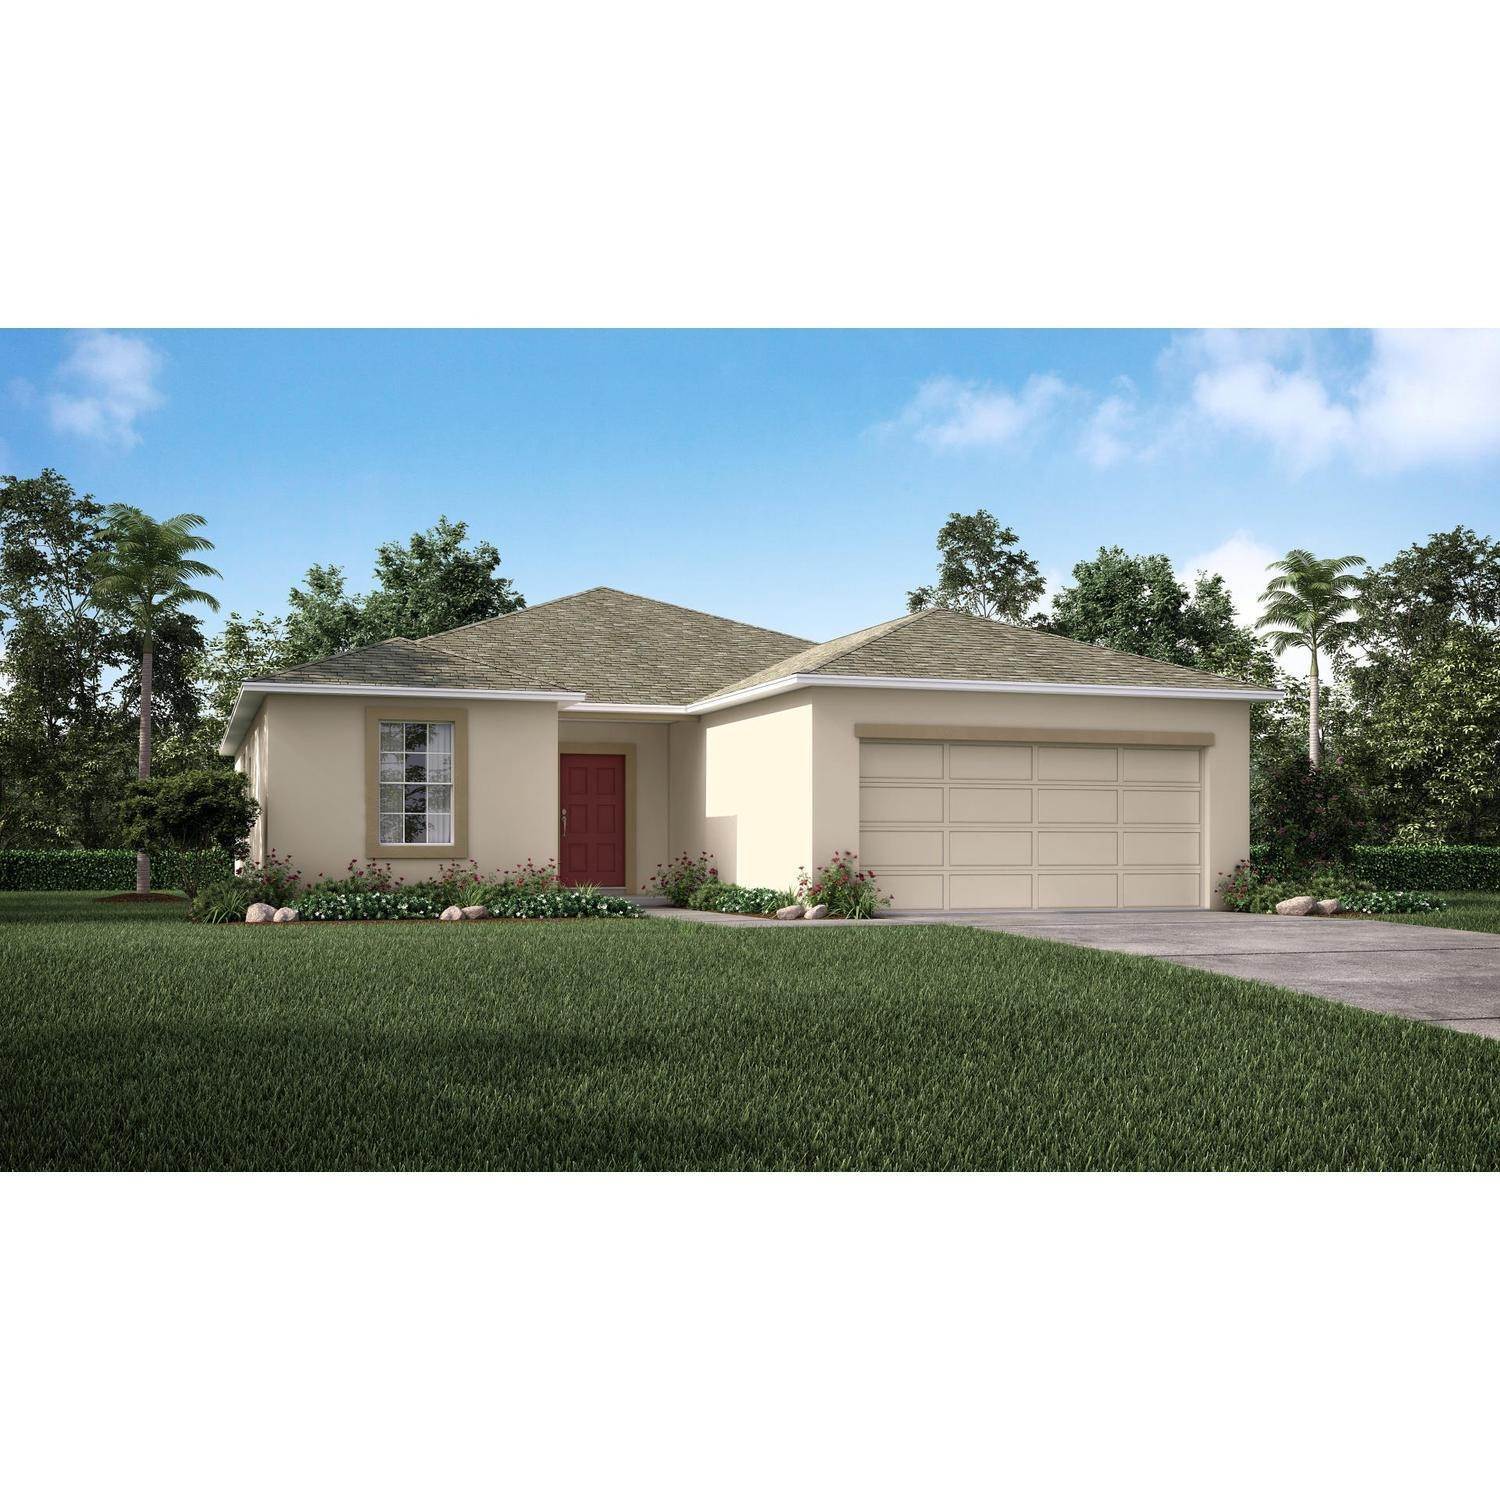 Single Family for Sale at Port St. Lucie, FL 34983